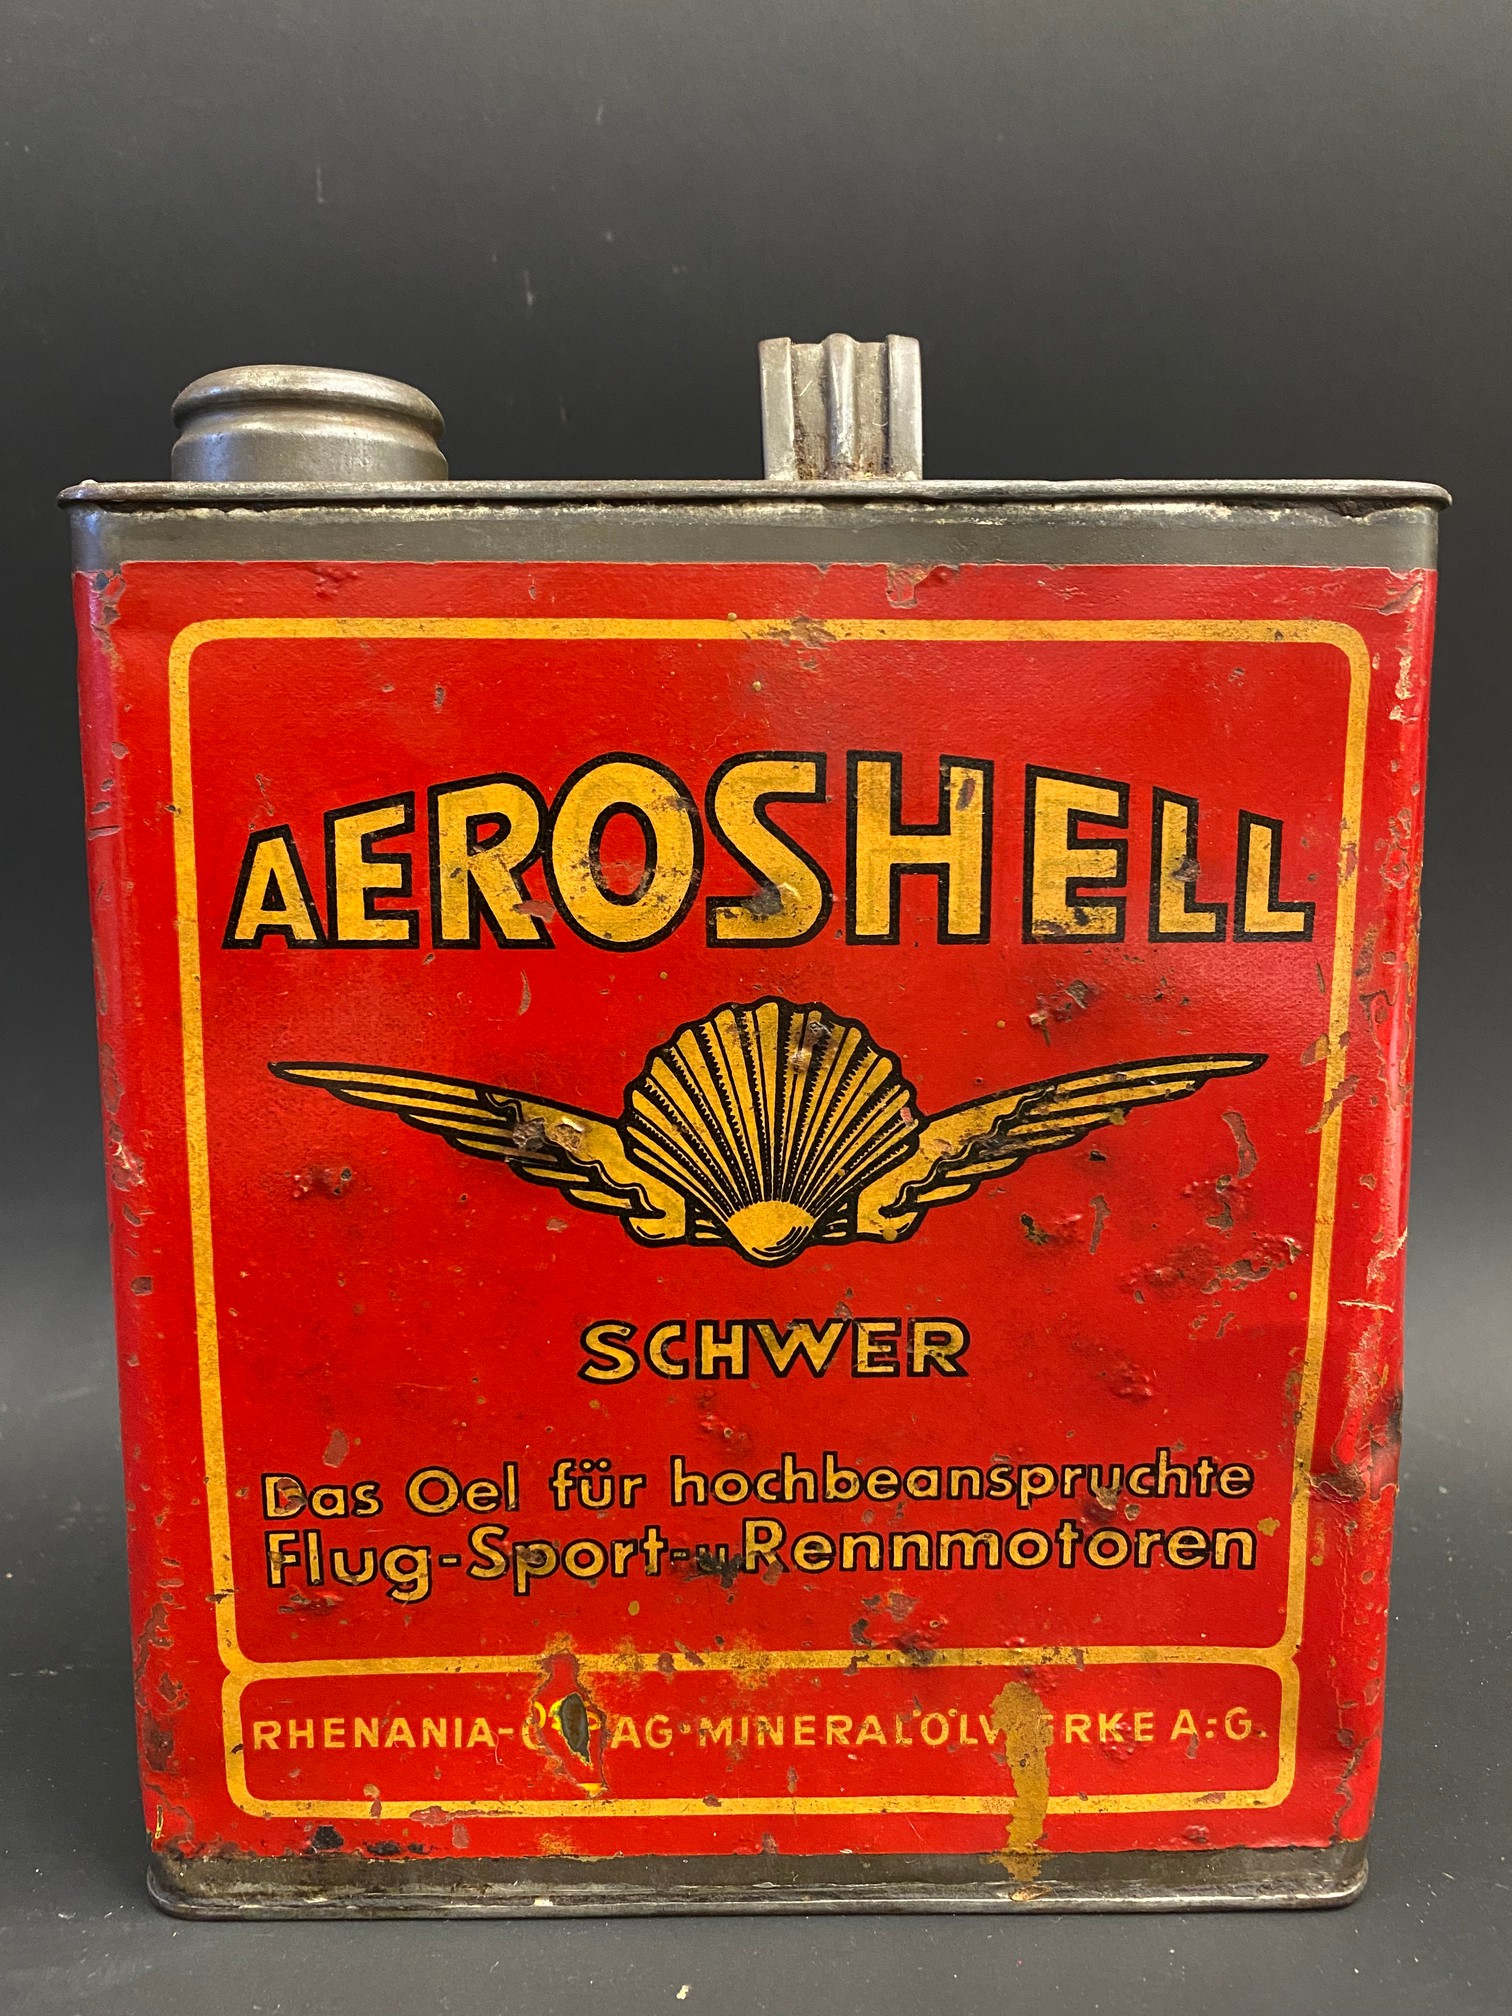 An early Aeroshell rectangular can, possibly half gallon, foreign version. - Image 3 of 6